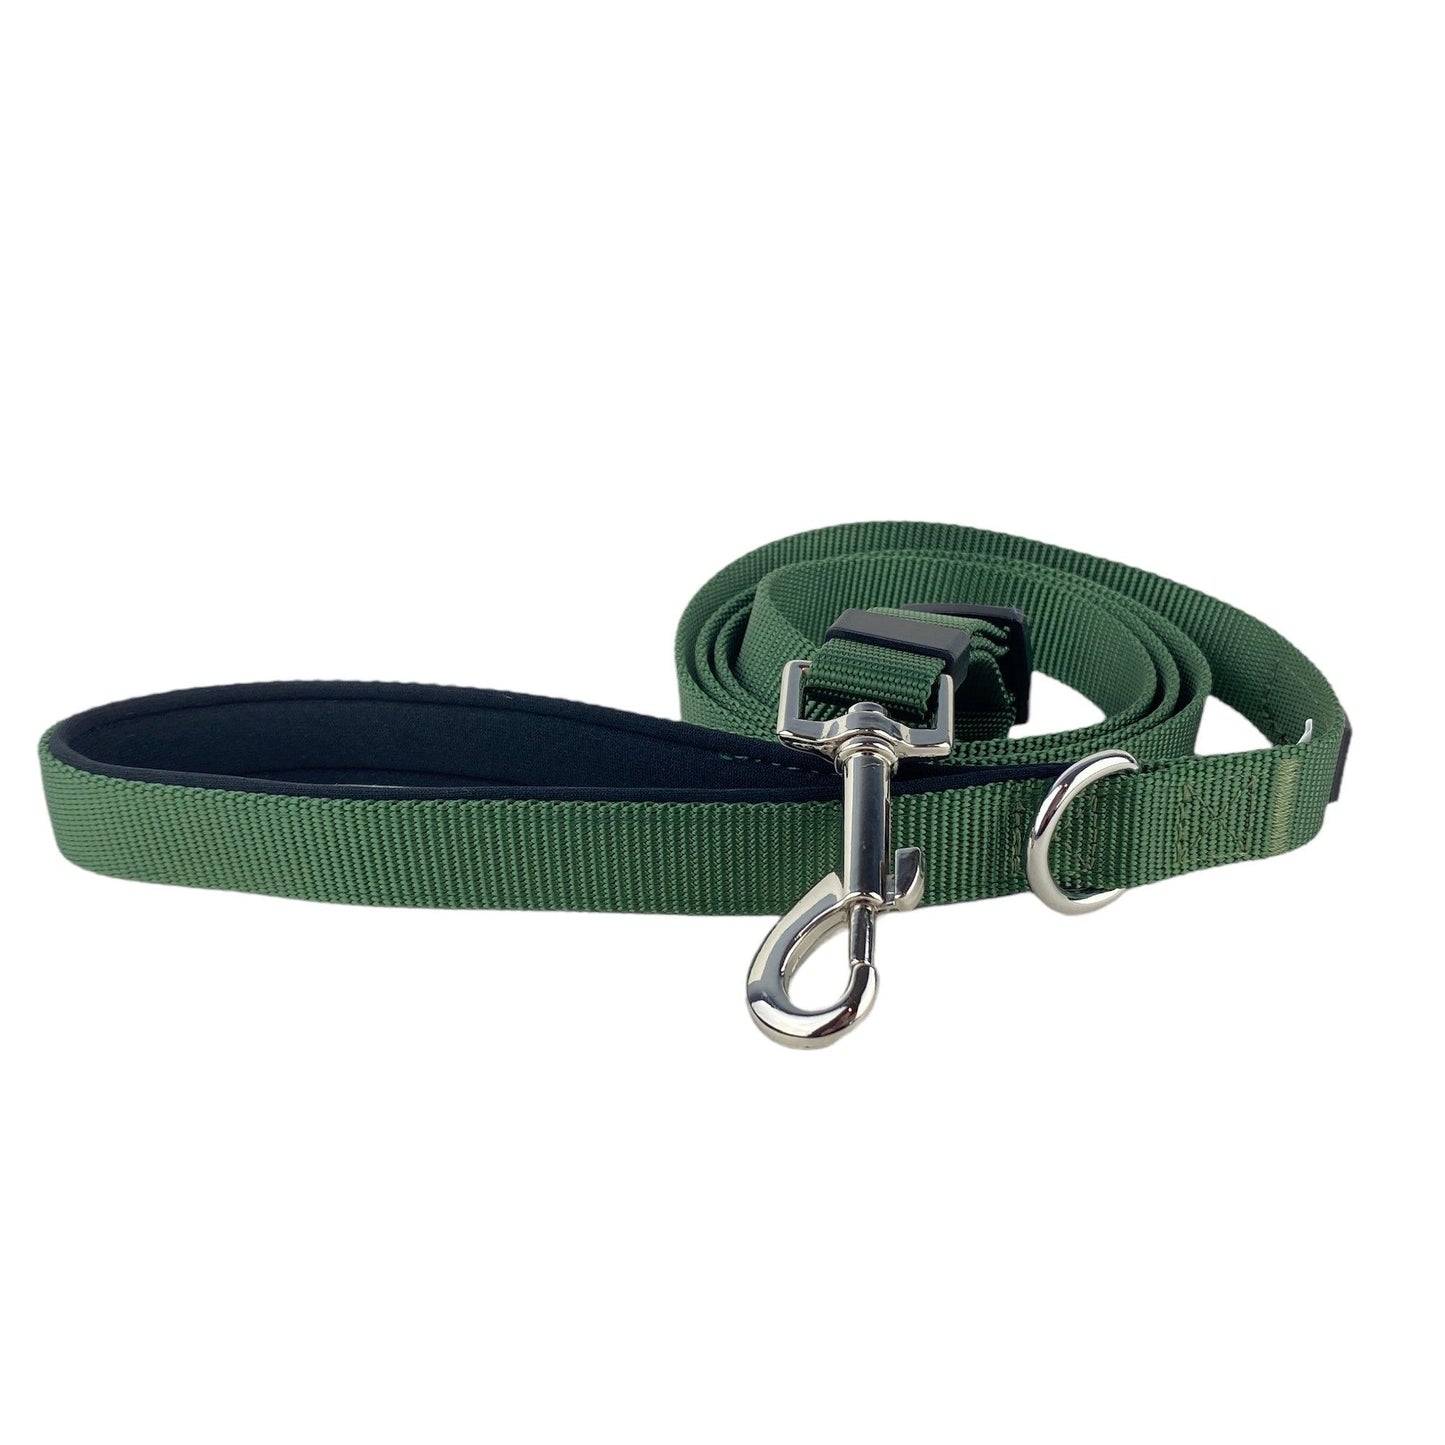 A photo of a green padded handle dog leash that adjusts from 3.5 to 6 feet from fearless pet